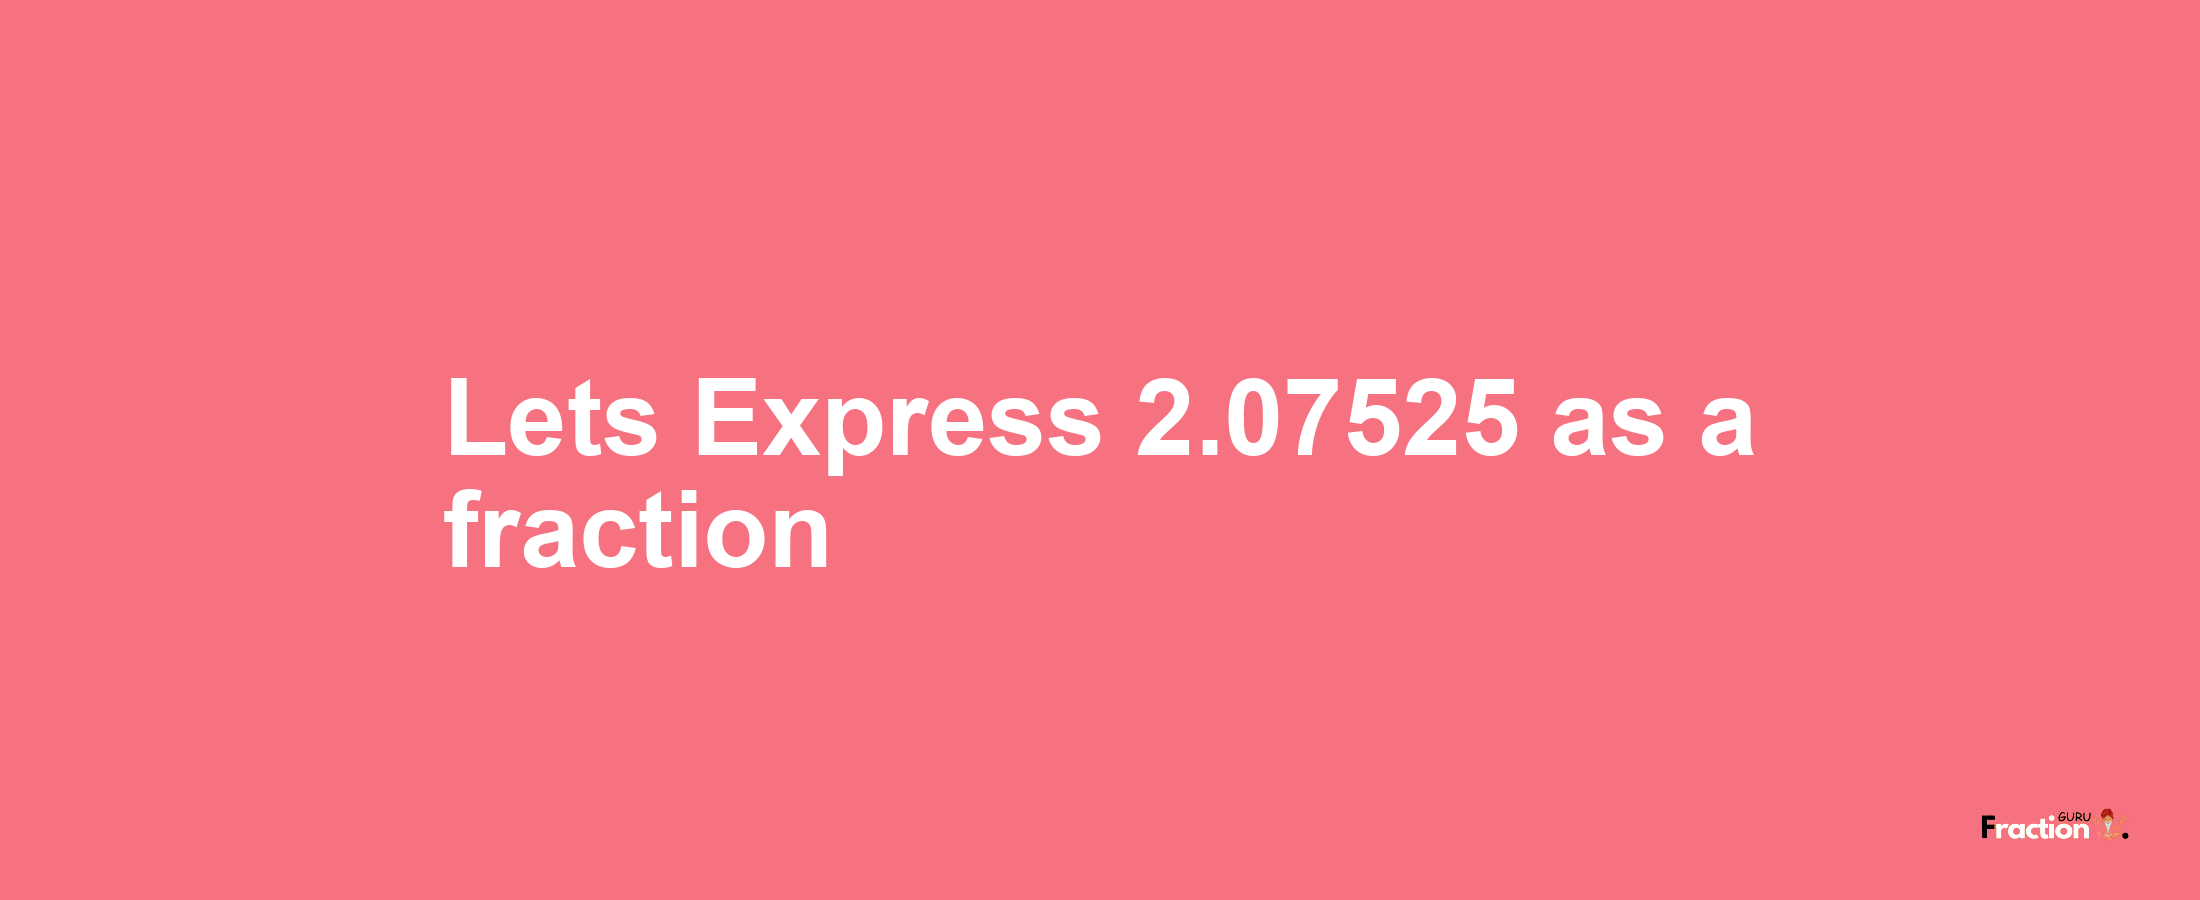 Lets Express 2.07525 as afraction